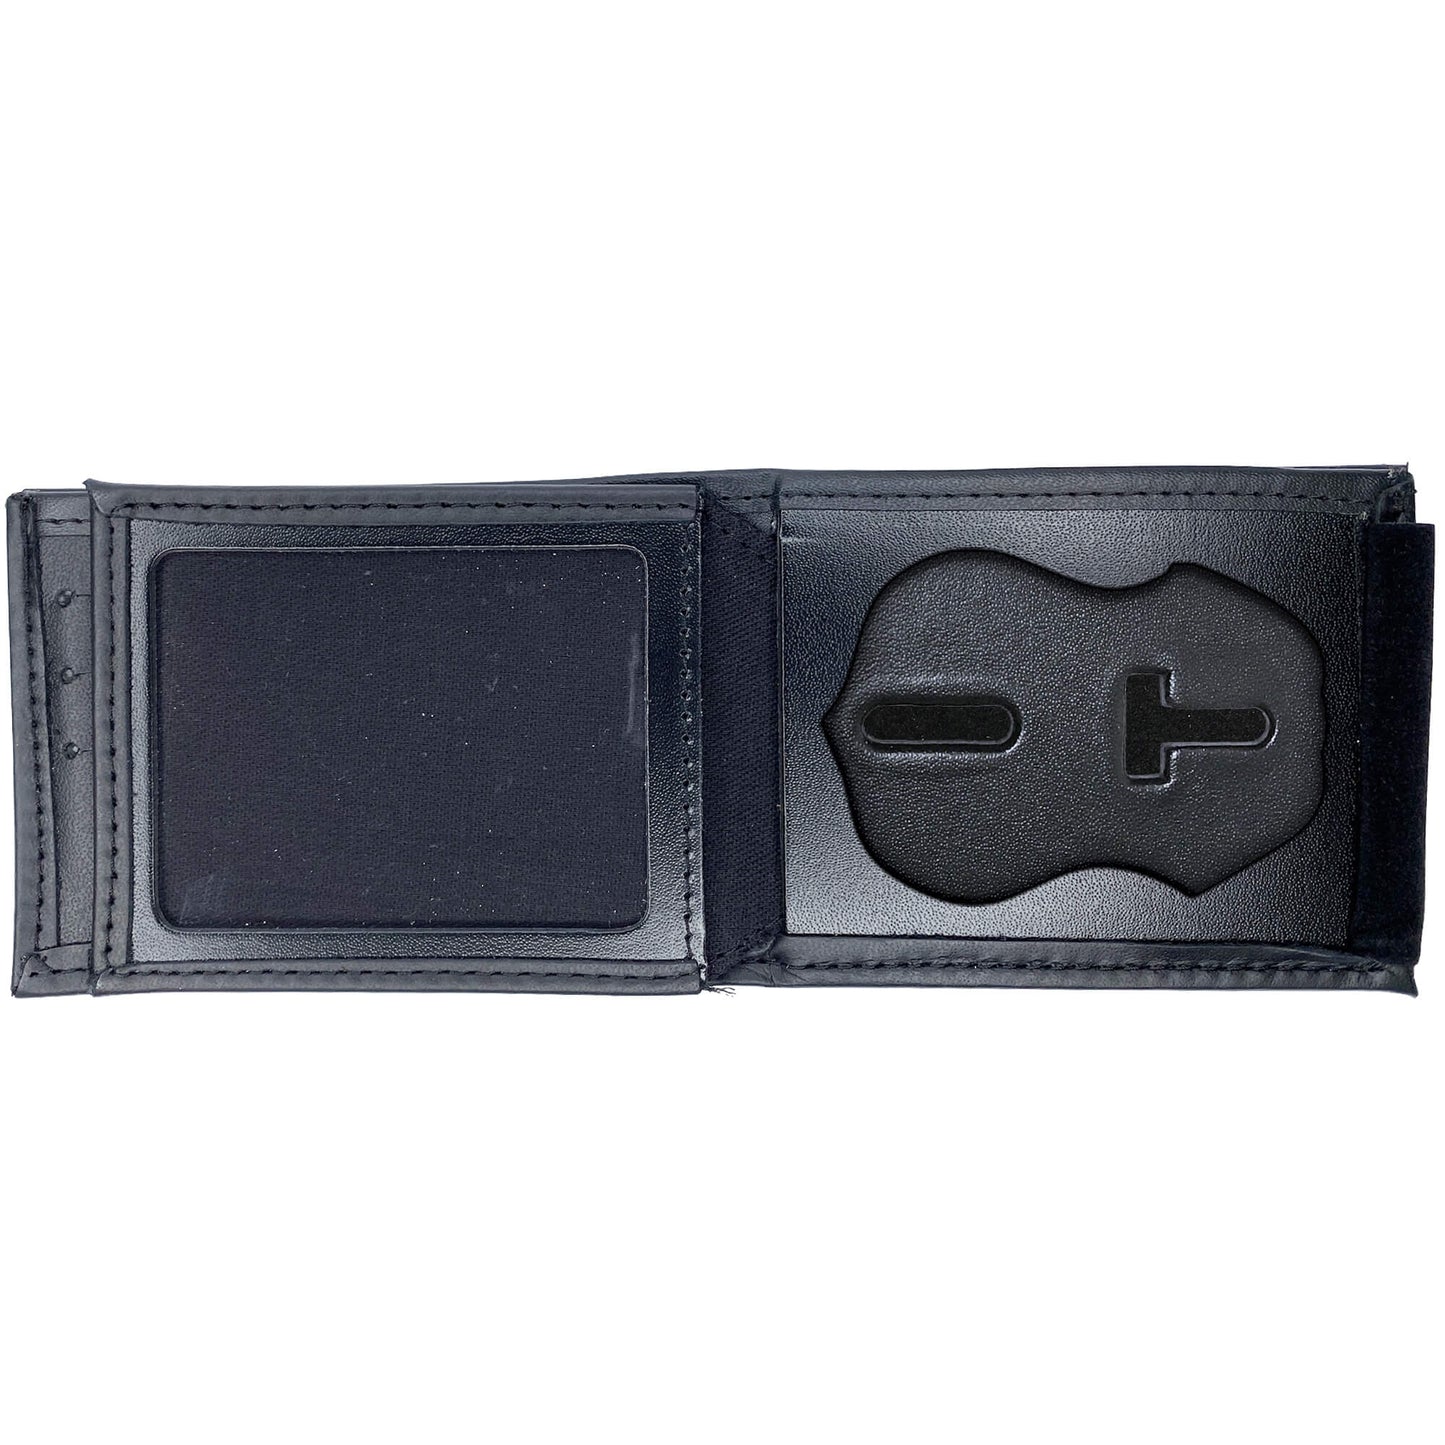 U.S. Homeland Security Investigations - HSI (3in) Horizontal Bifold Hidden Badge Wallet-Perfect Fit-911 Duty Gear USA